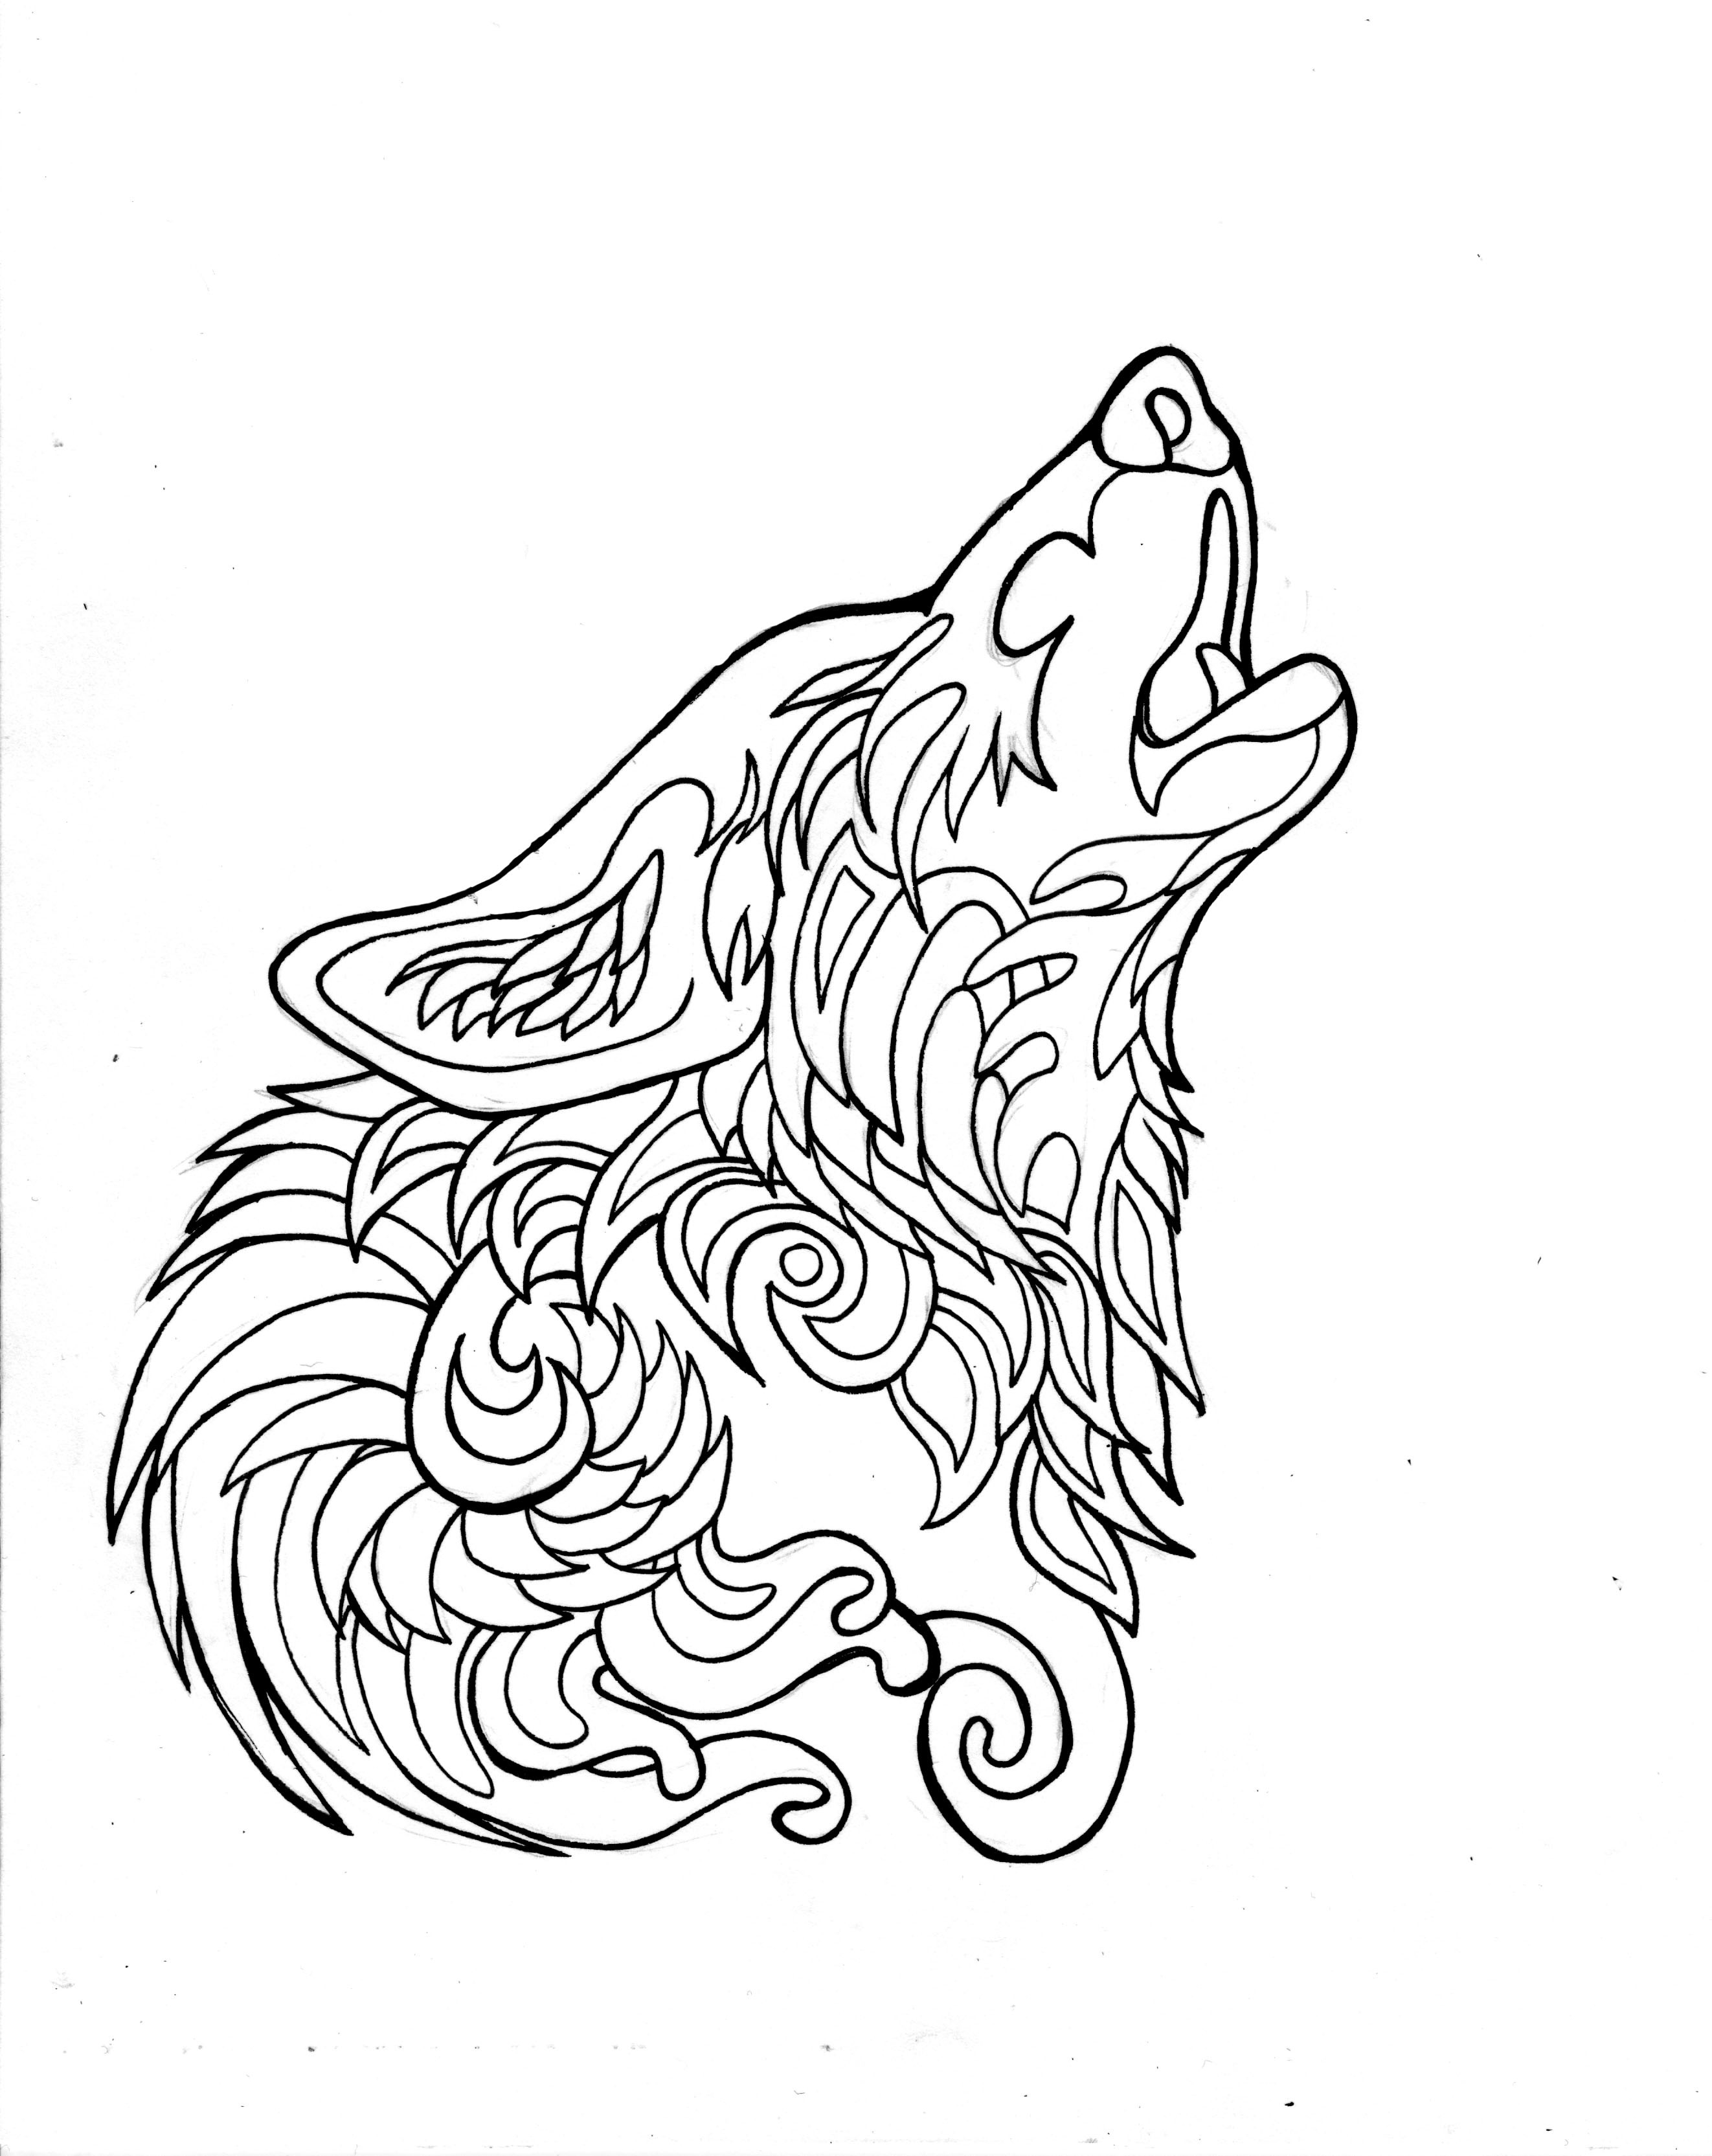 Coloring Pages Of A Wolf Wolf Pictures Coloring Pages At Getdrawings Free For Personal